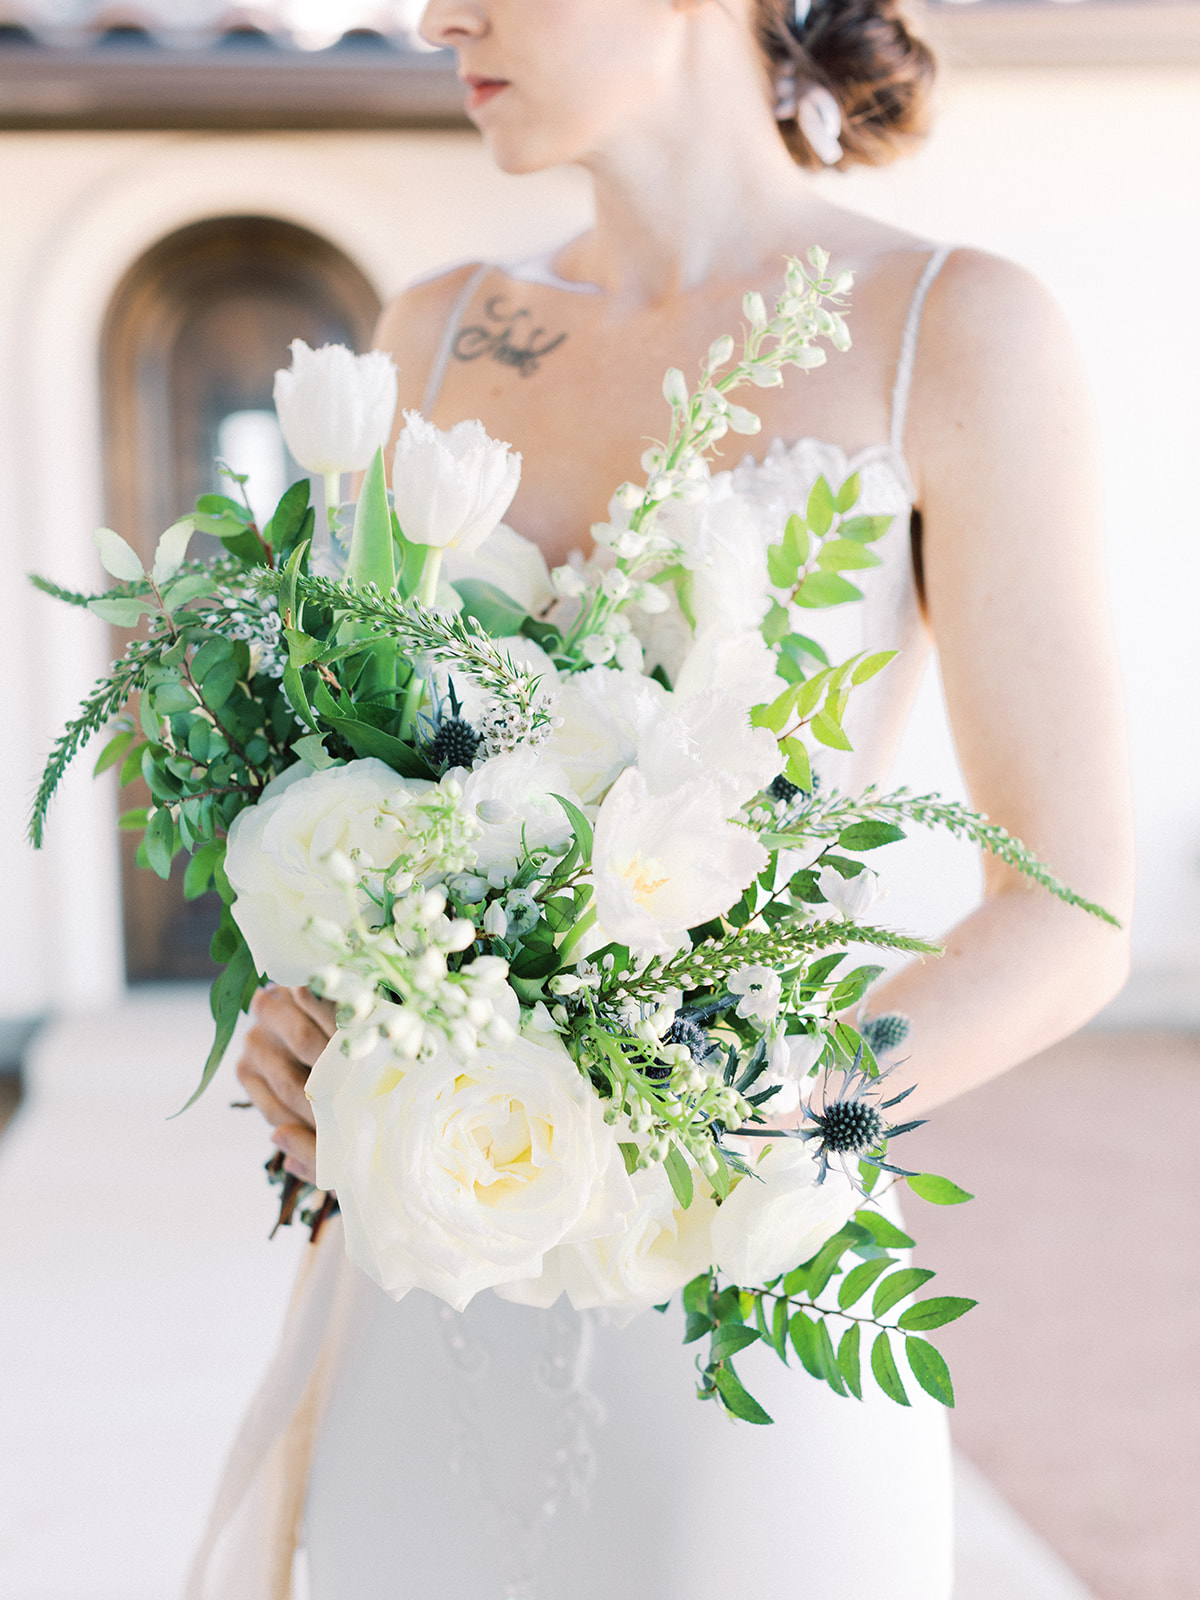 White and greenery wedding bouquet: Elopement vineyard wedding at Umbra Winery by Alexa Kay Events. See more wedding ideas at alexakayevents.com!